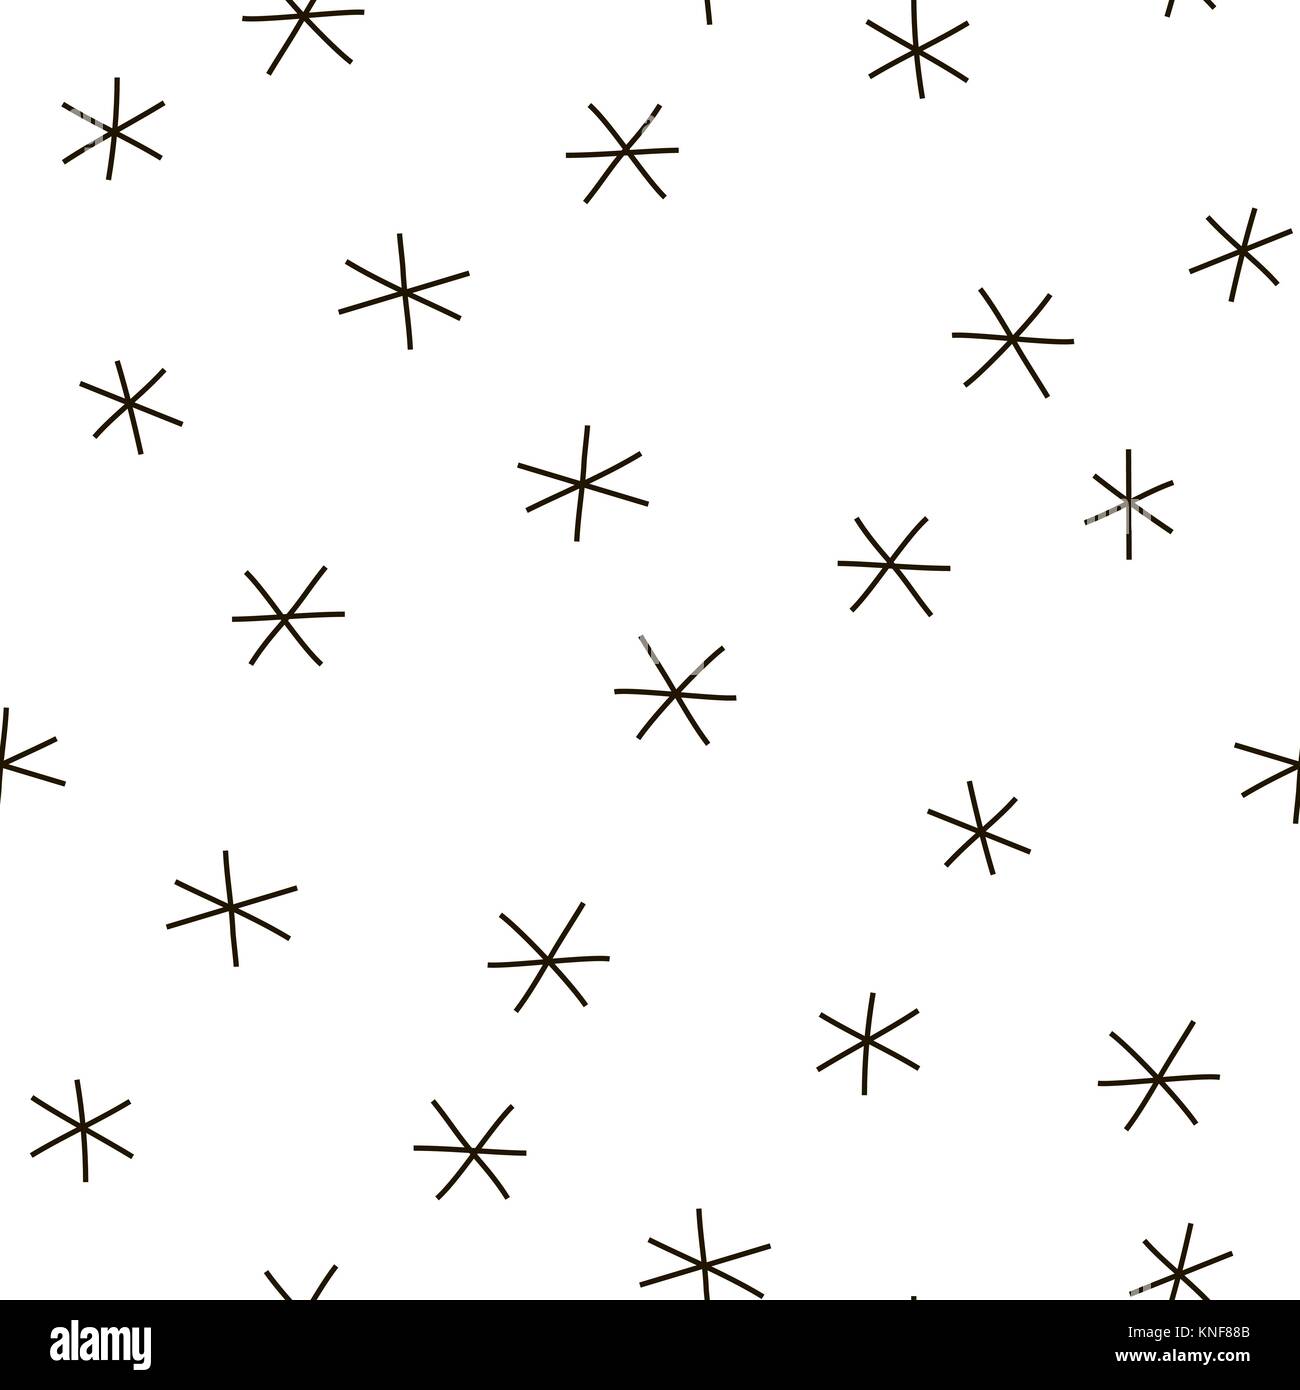 Abstract geometric fashion design stars and snowflakes pattern Stock Vector